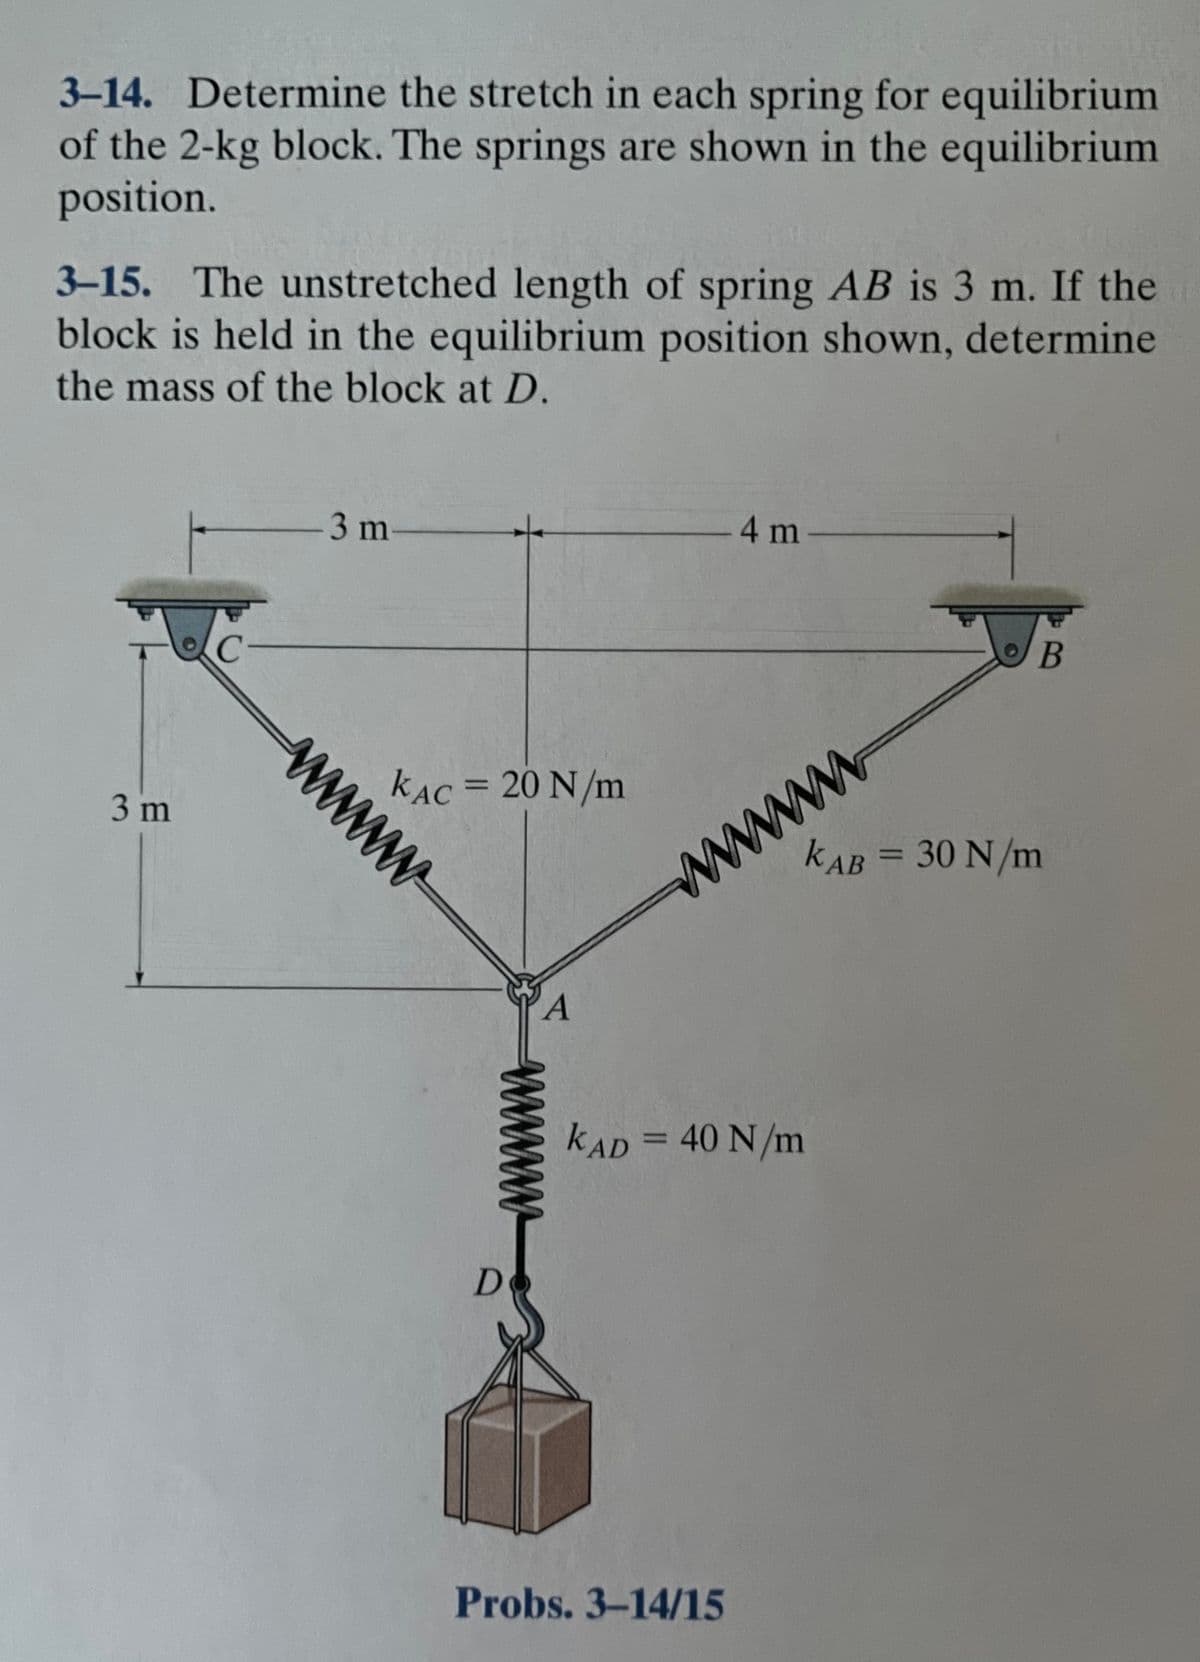 3-14. Determine the stretch in each spring for equilibrium
of the 2-kg block. The springs are shown in the equilibrium
position.
3-15. The unstretched length of spring AB is 3 m. If the
block is held in the equilibrium position shown, determine
the mass of the block at D.
4 m-
3 m
B
C-
www
kAB = 30 N/m
kẠC = 20 N/m
%3D
3 m
kAD = 40 N/m
%3D
Do
Probs. 3-14/15
www
www
